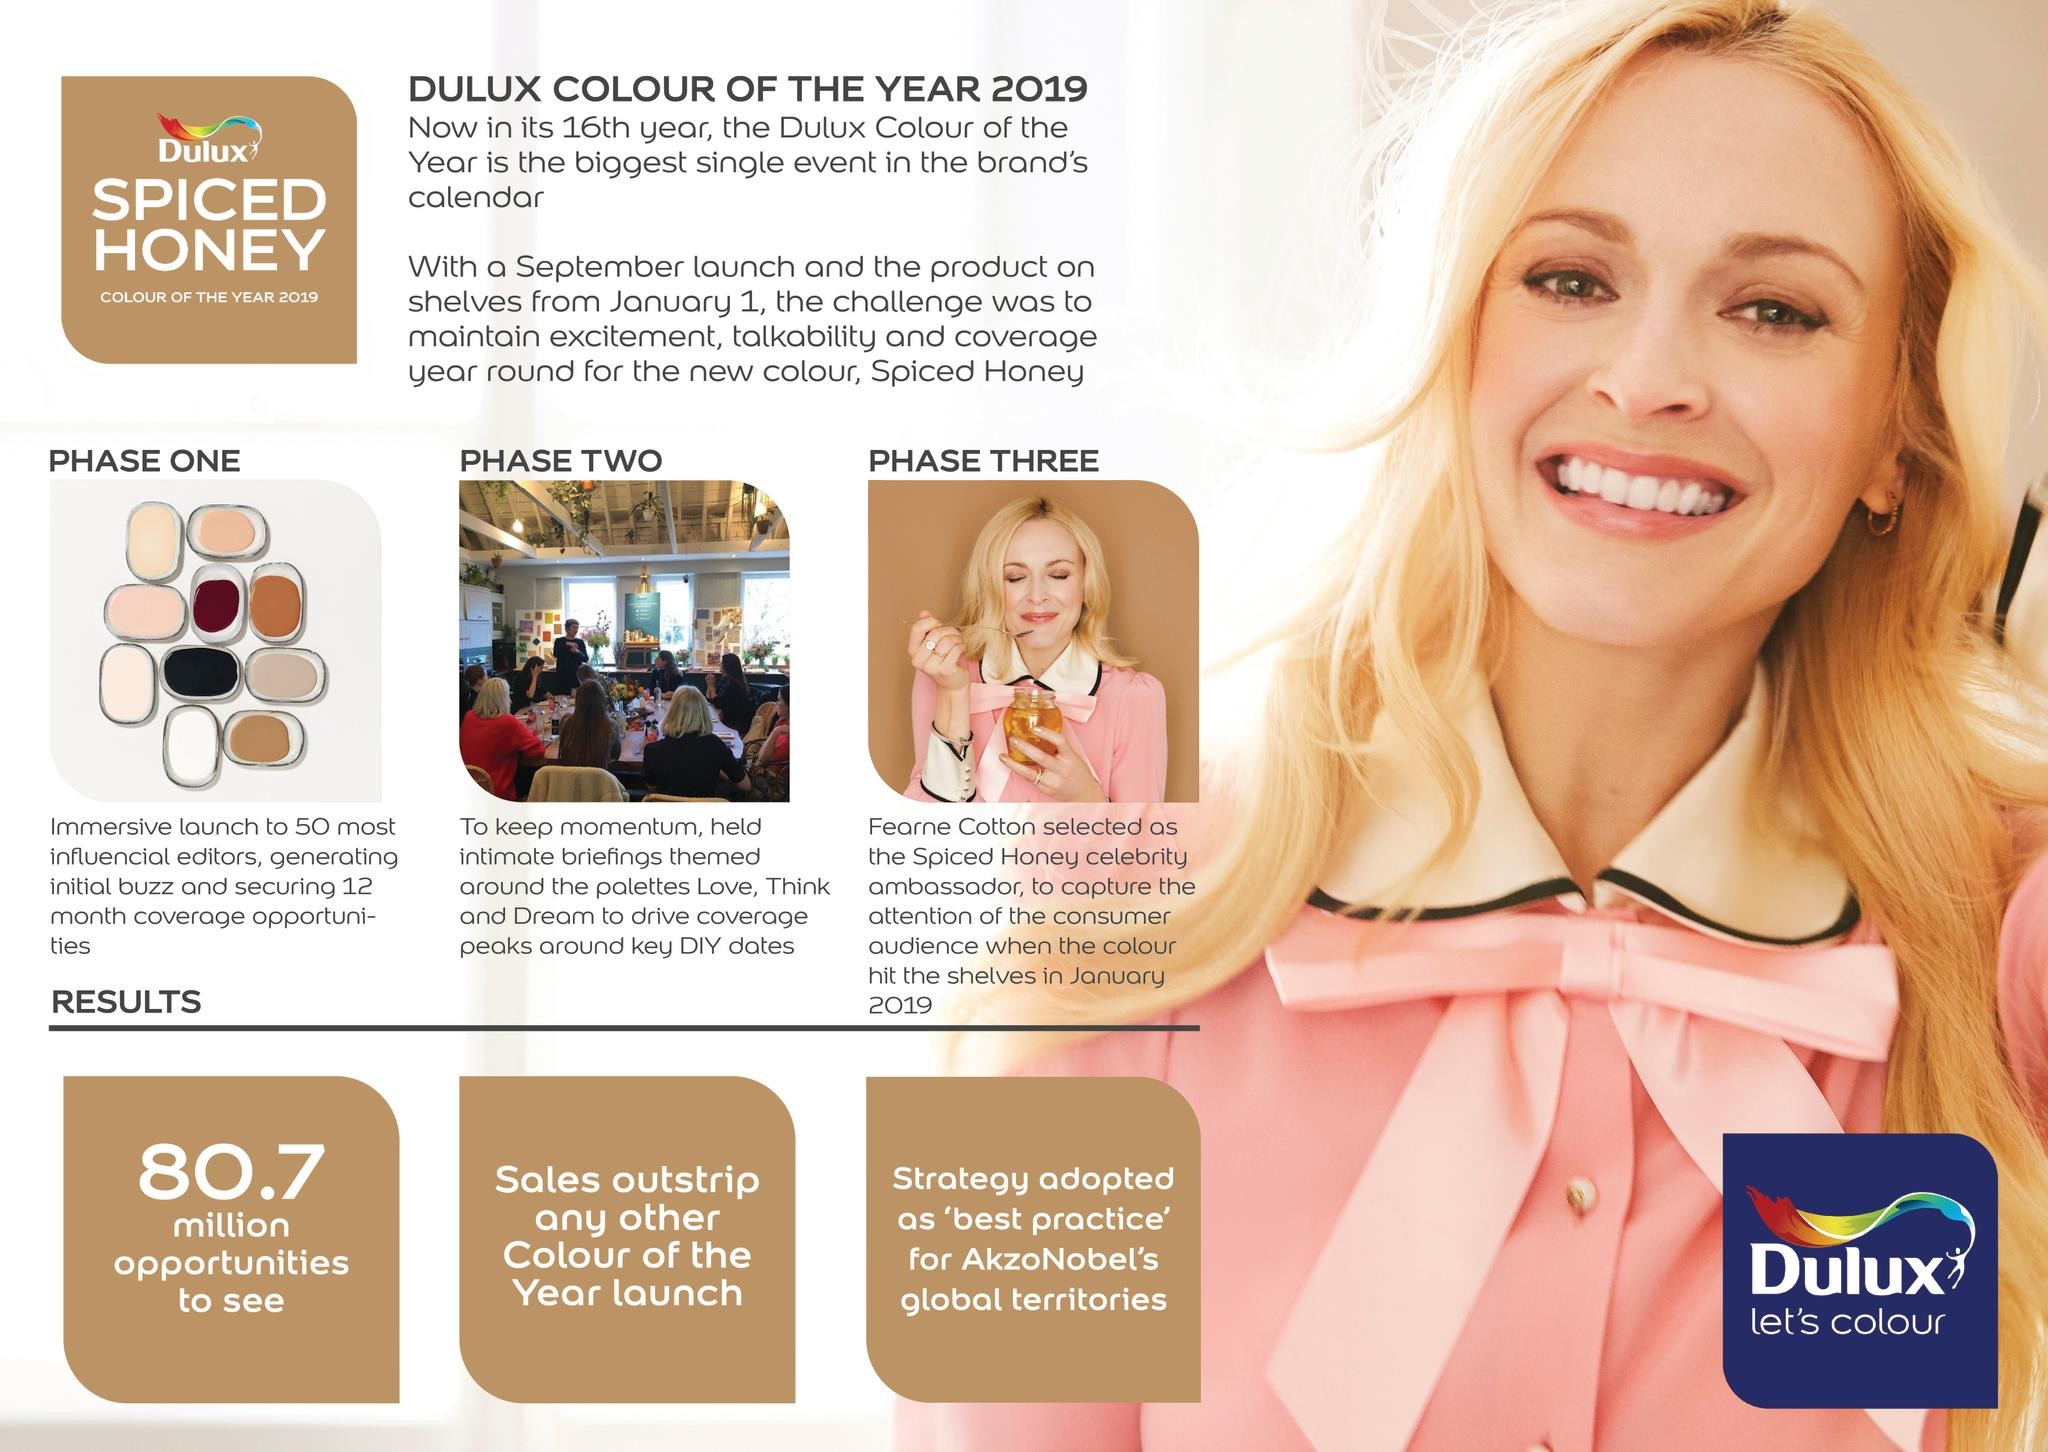 COTY 2019: A best practice global campaign